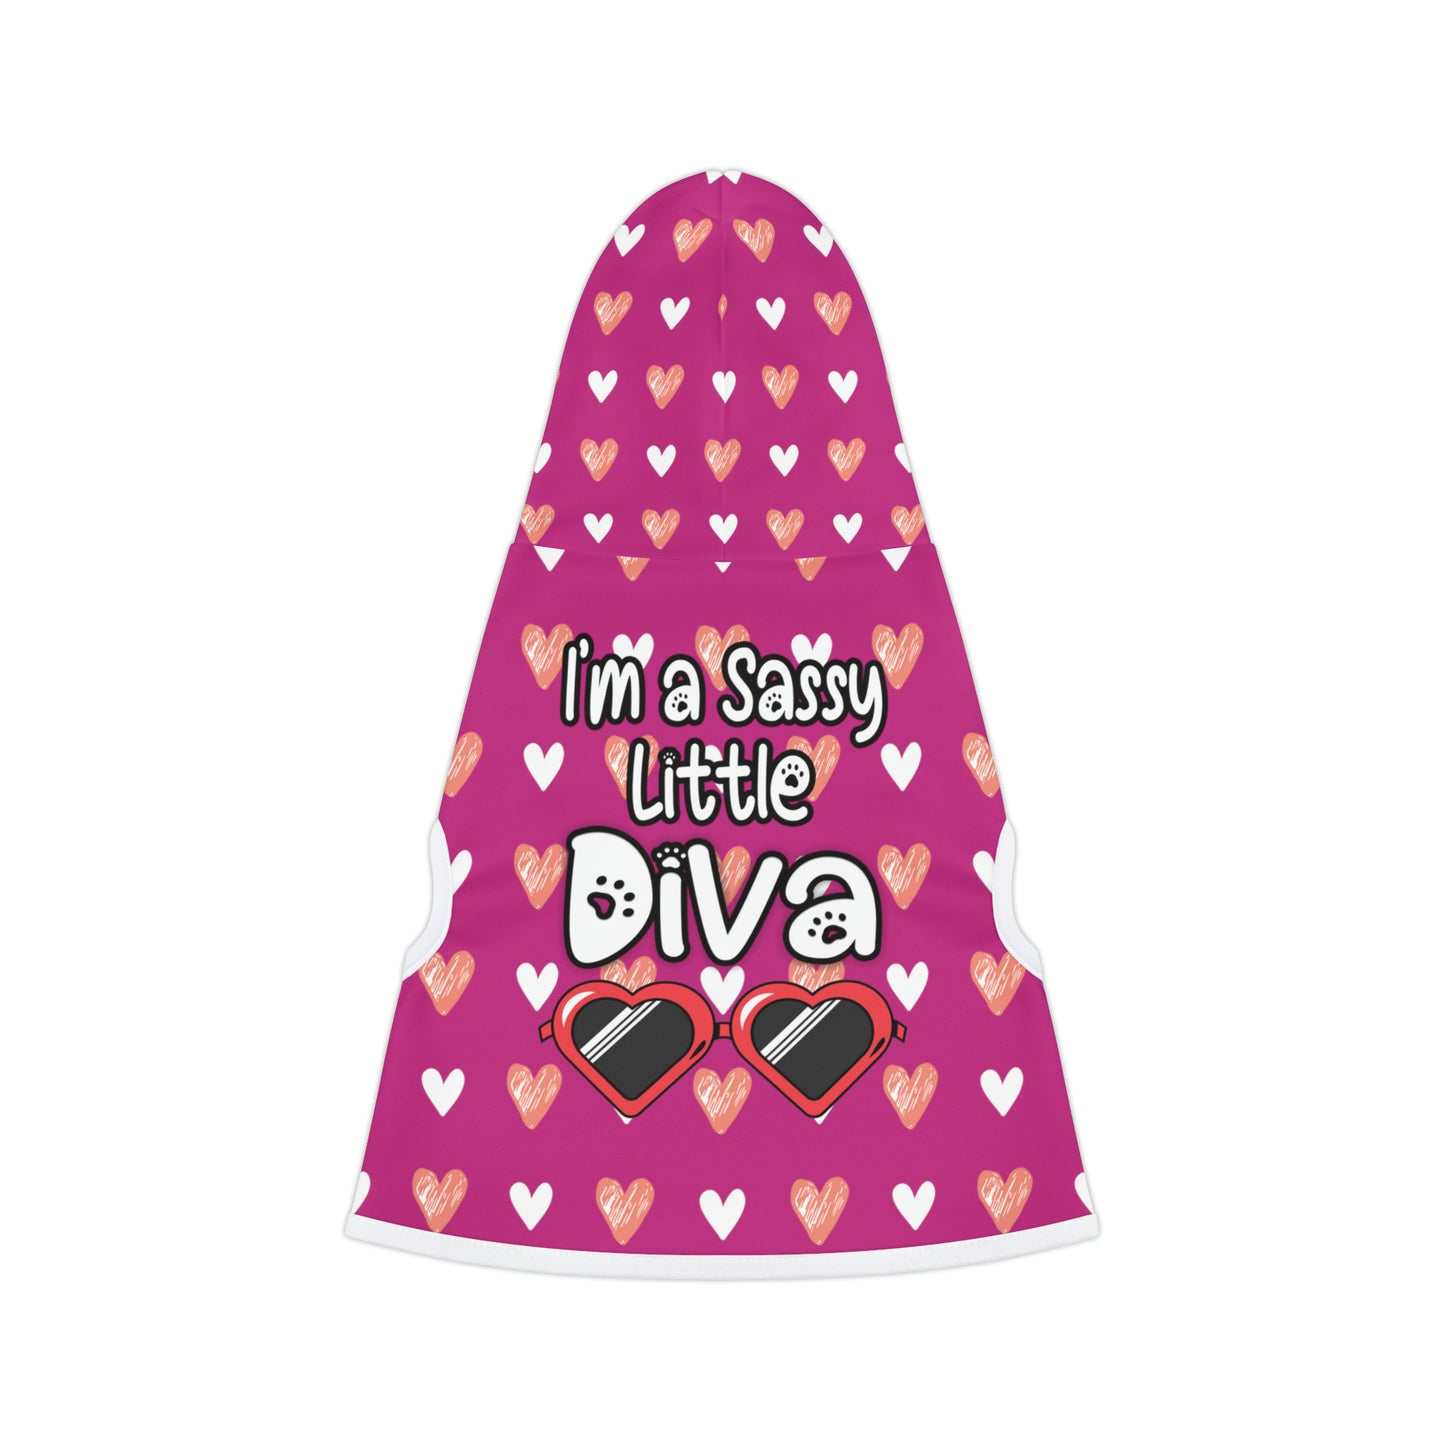 pet hoodie with a beautiful hearts pattern design with a message that says: "I'm a Sassy Little Diva" and sun glasses. Hoodie's Color is pink